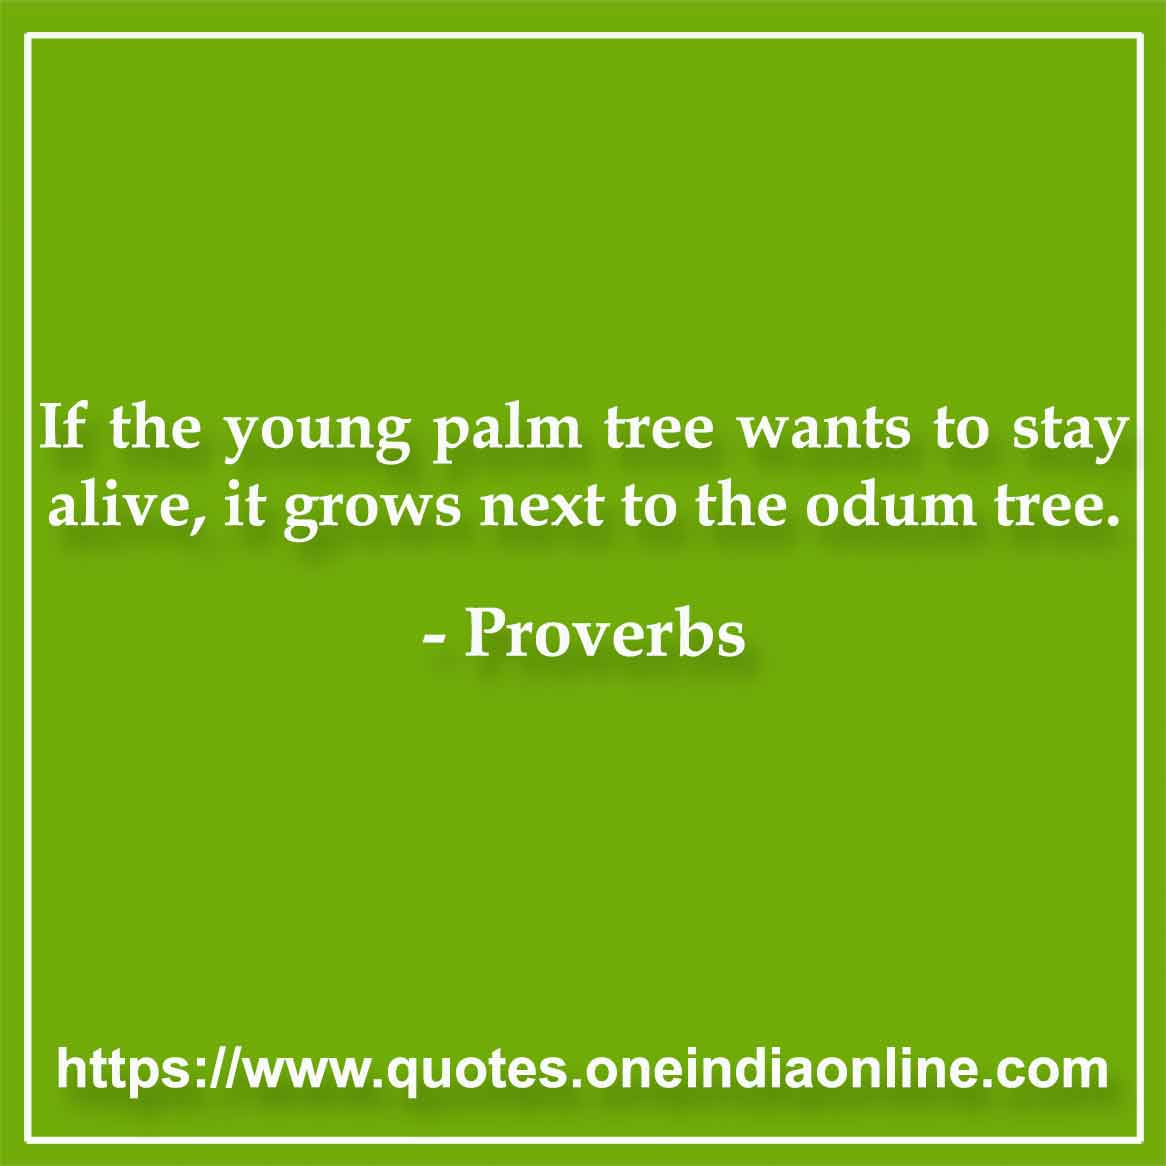 If the young palm tree wants to stay alive, it grows next to the odum tree.